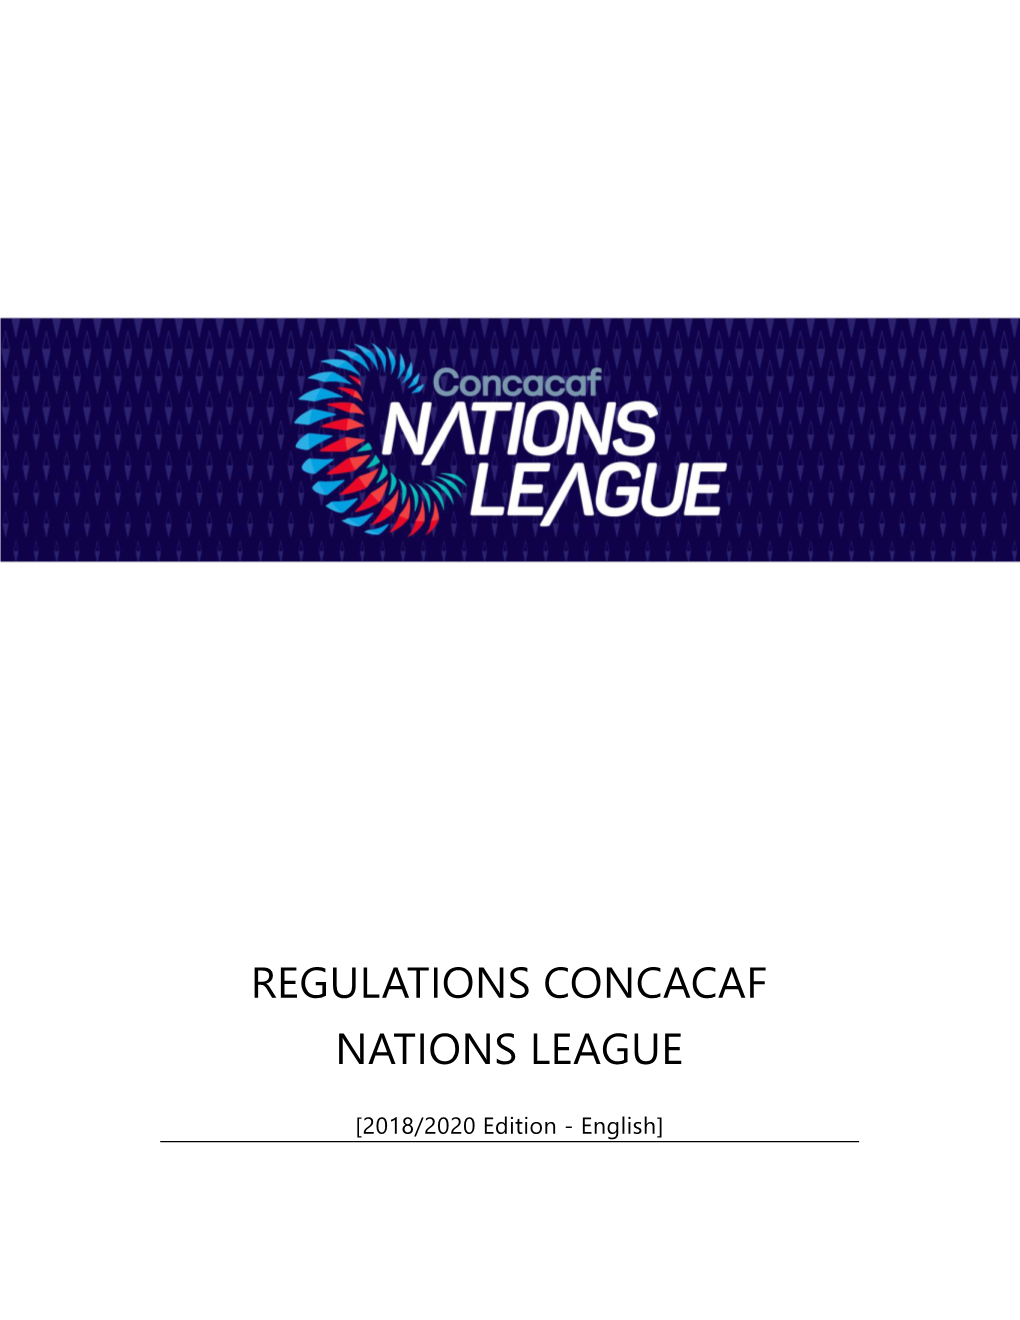 Regulations Concacaf Nations League